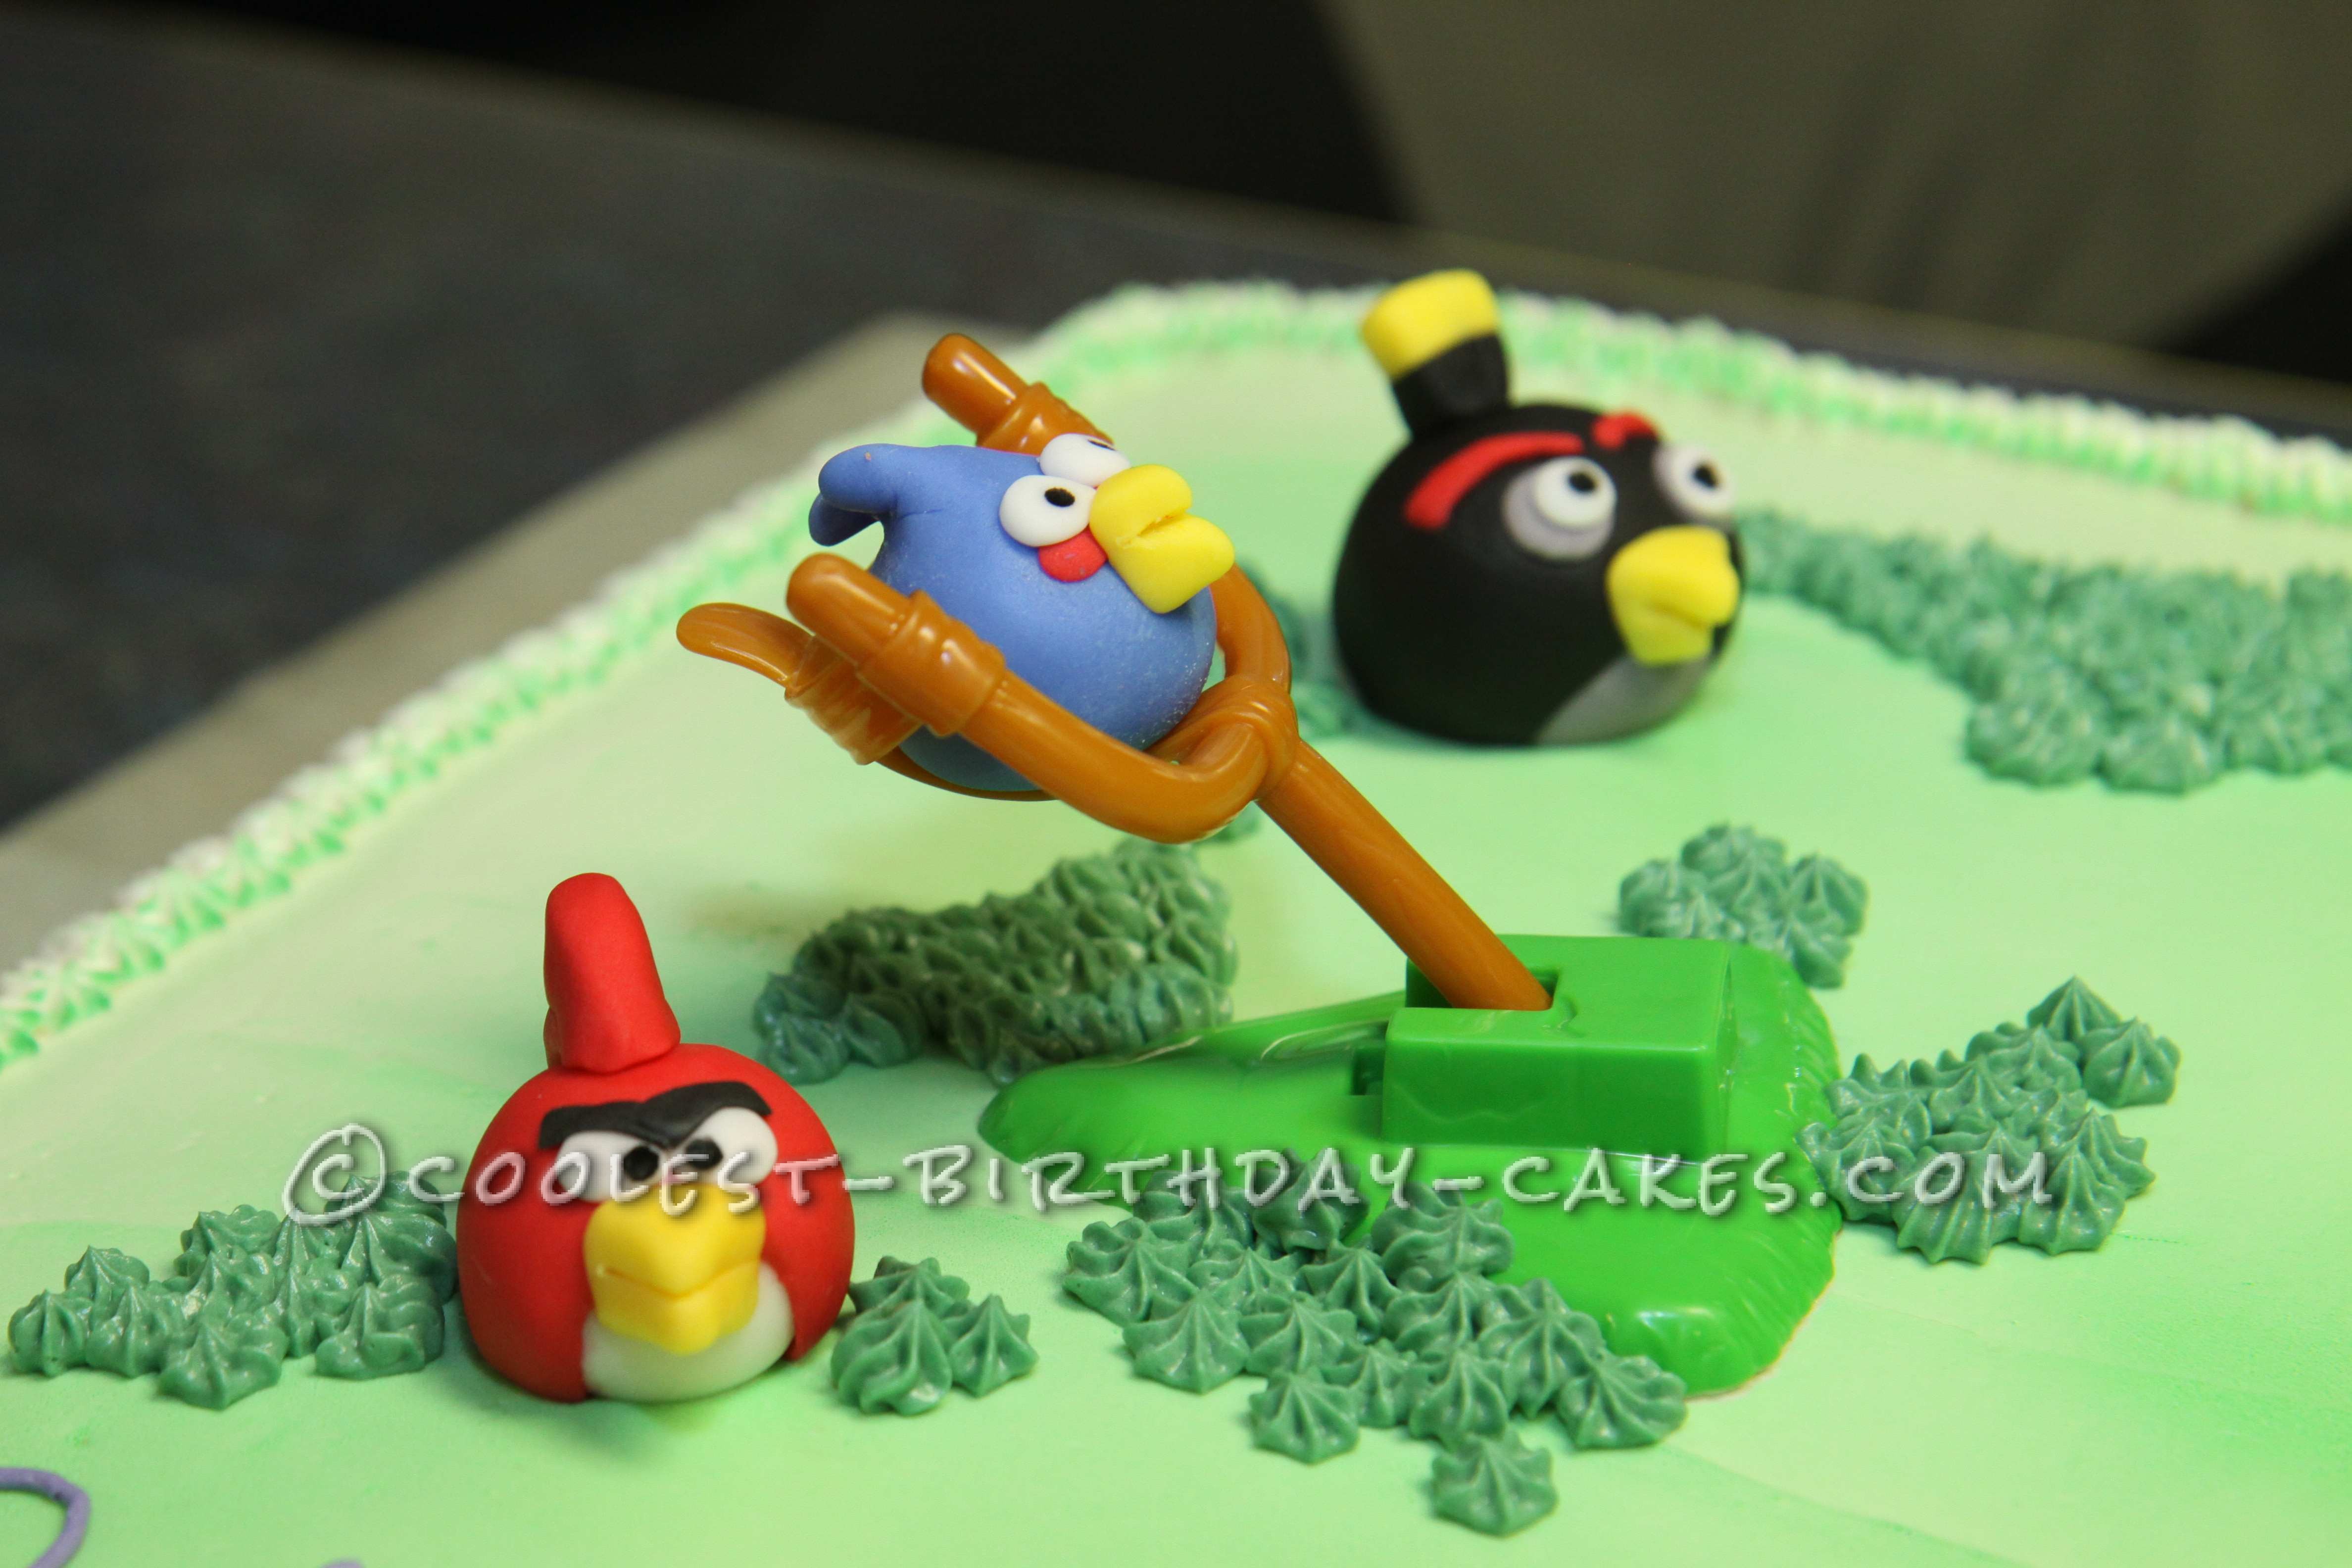 Coolest Angry Birds 8th Birthday Cake